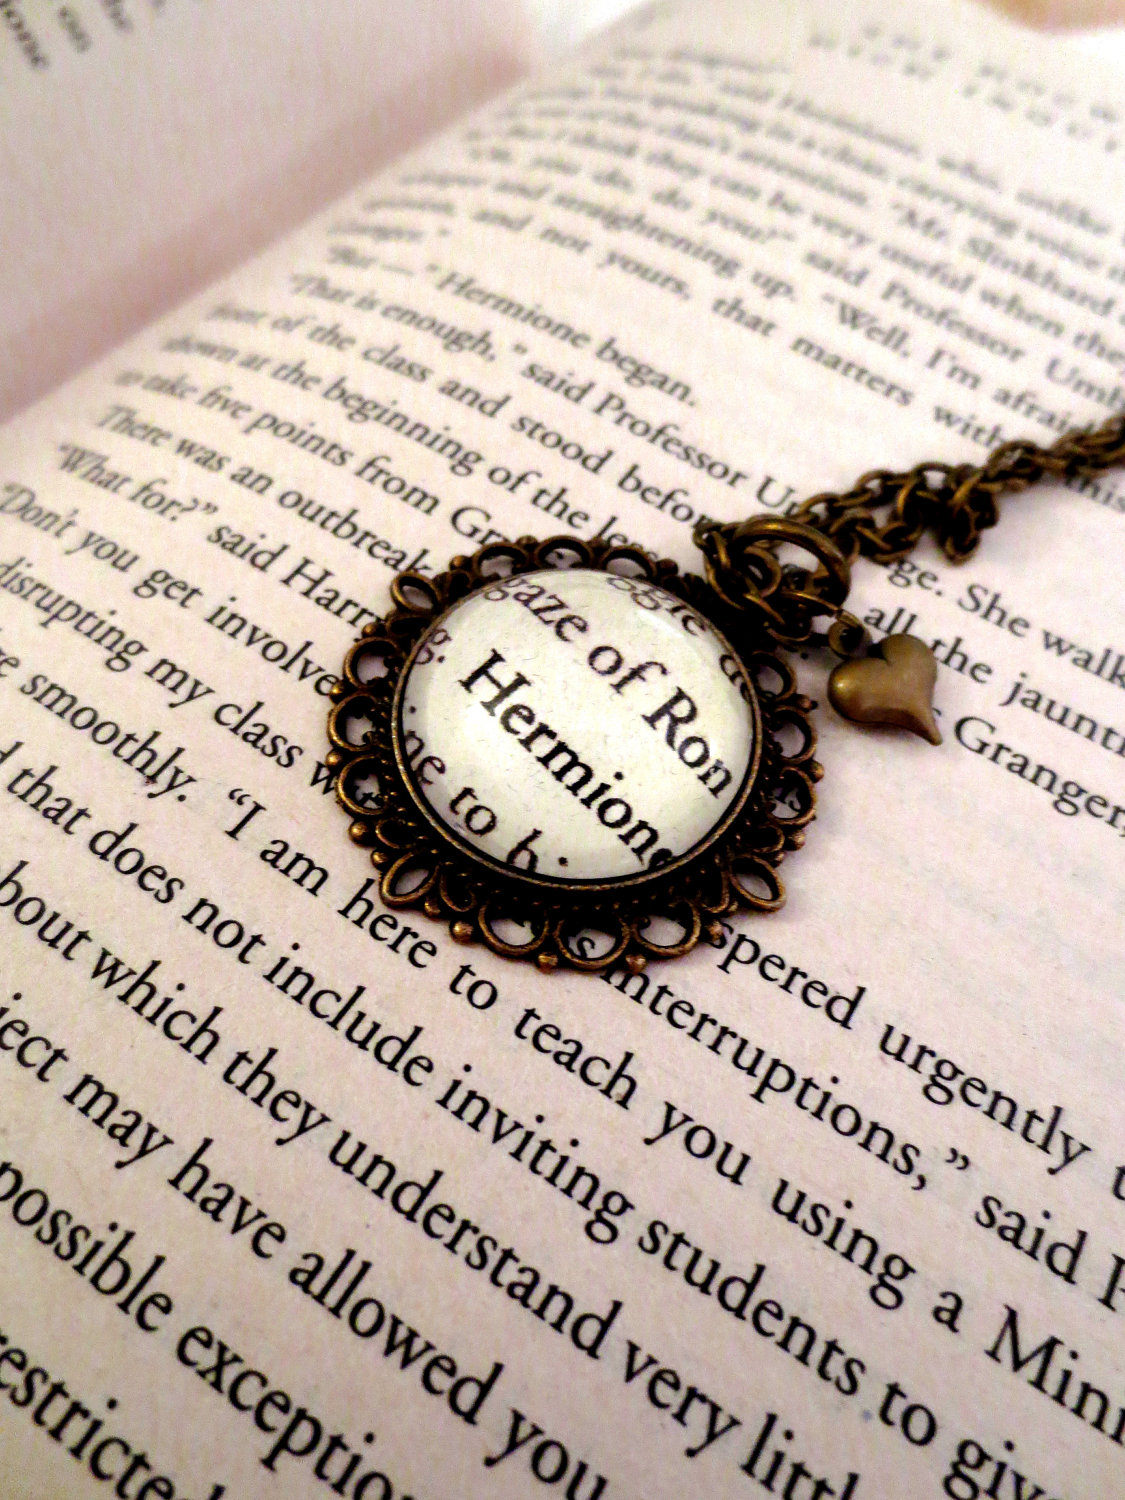 Ron Weasley And Hermione Granger From Harry Potter Antiqued Bronze Book Page Necklace